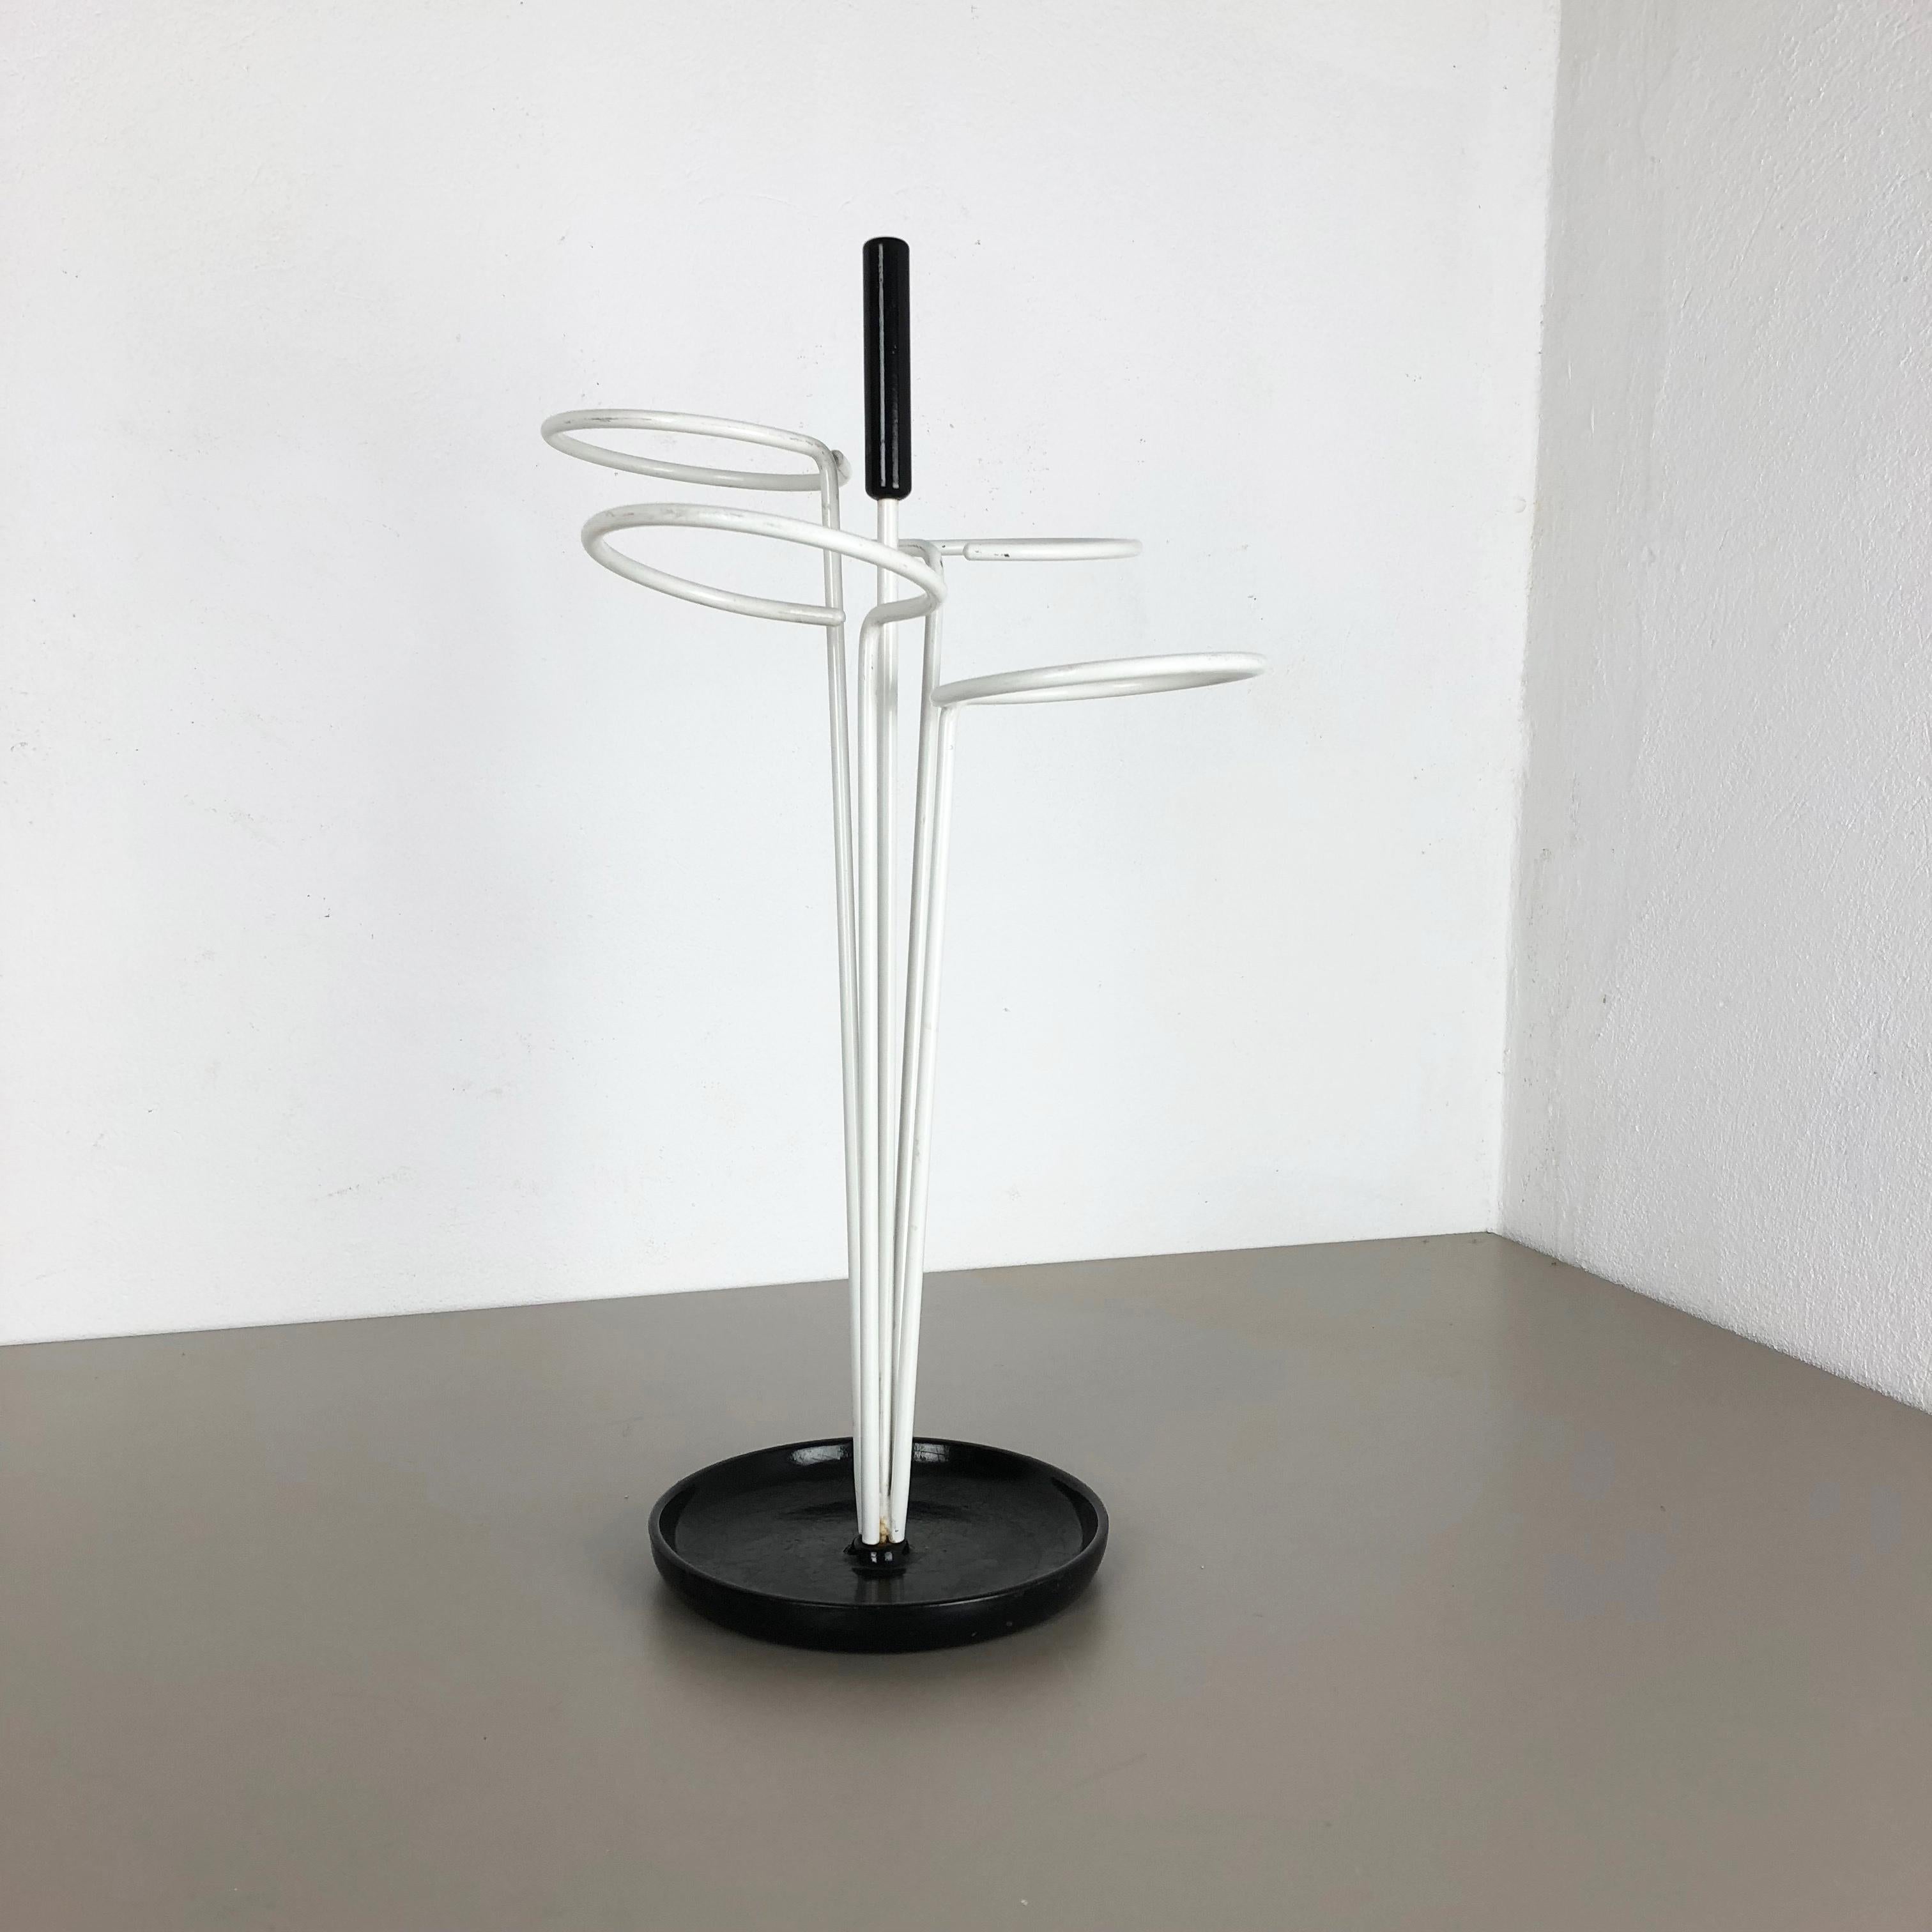 Article:

Umbrella stand


Origin:

Germany


Age:

1960s


This original vintage umbrella stand was produced in the 1960s in Germany. It is made of solid metal with white lacquered loop elements for umbrellas at the top and upright